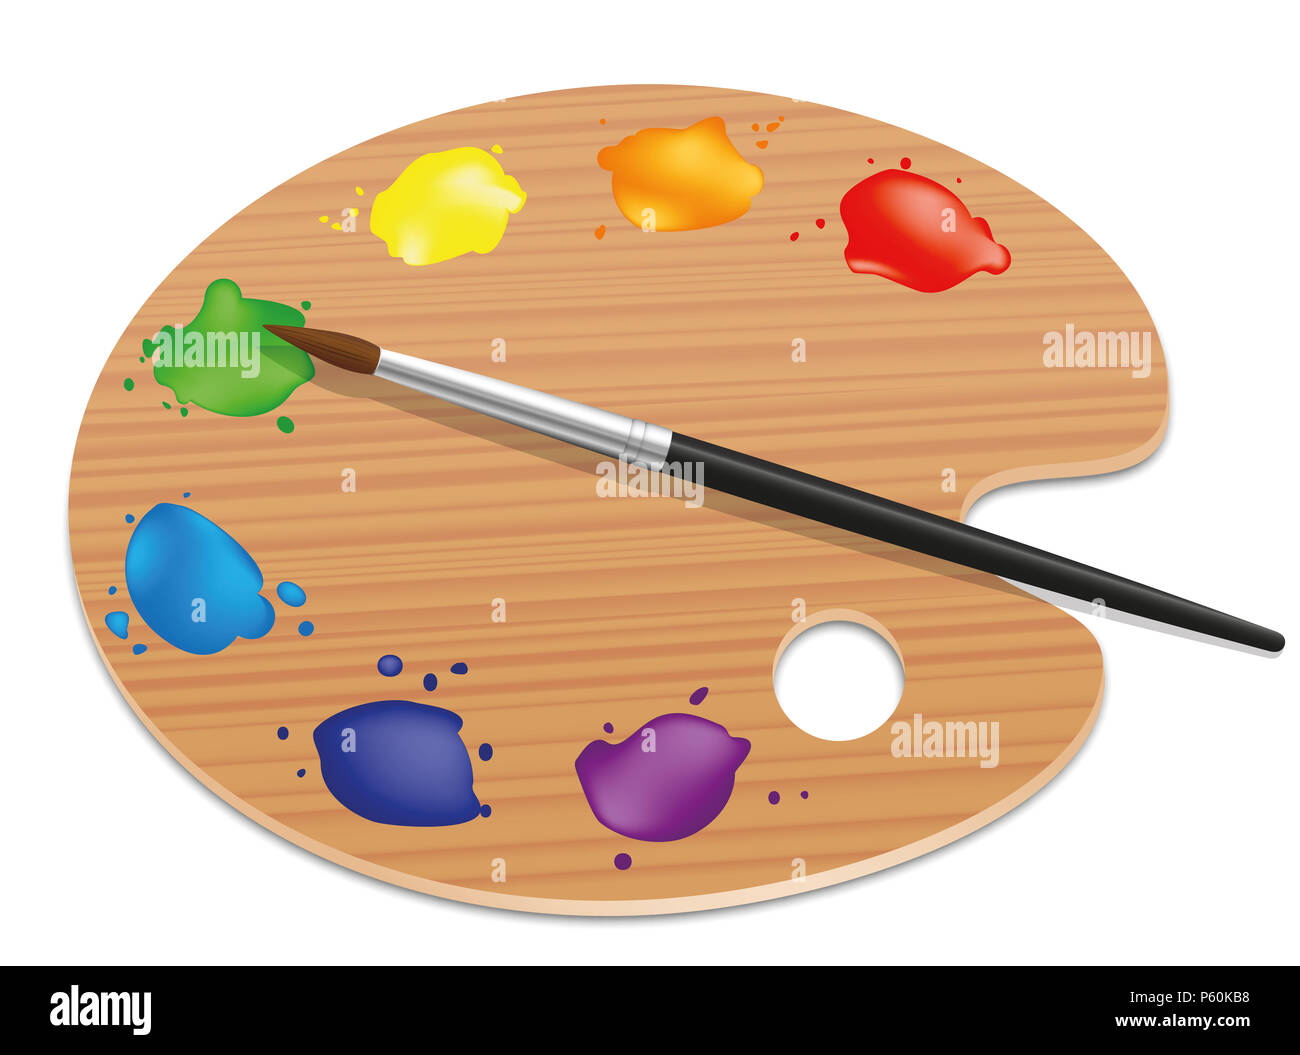 Small Watercolor Paint Palette with Brush Cut Out Stock Photo - Alamy